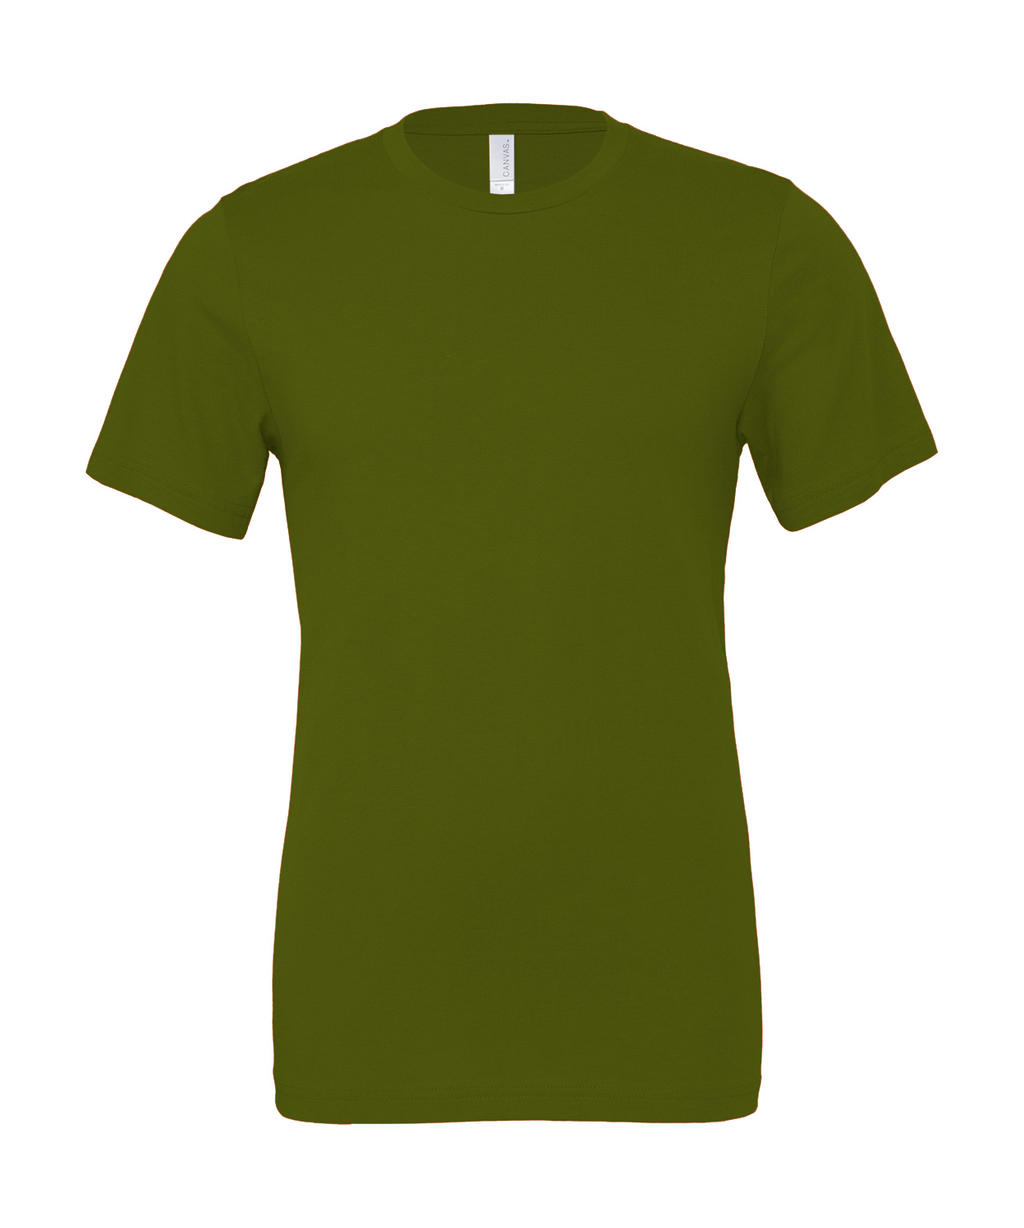  Unisex Jersey Short Sleeve Tee in Farbe Olive